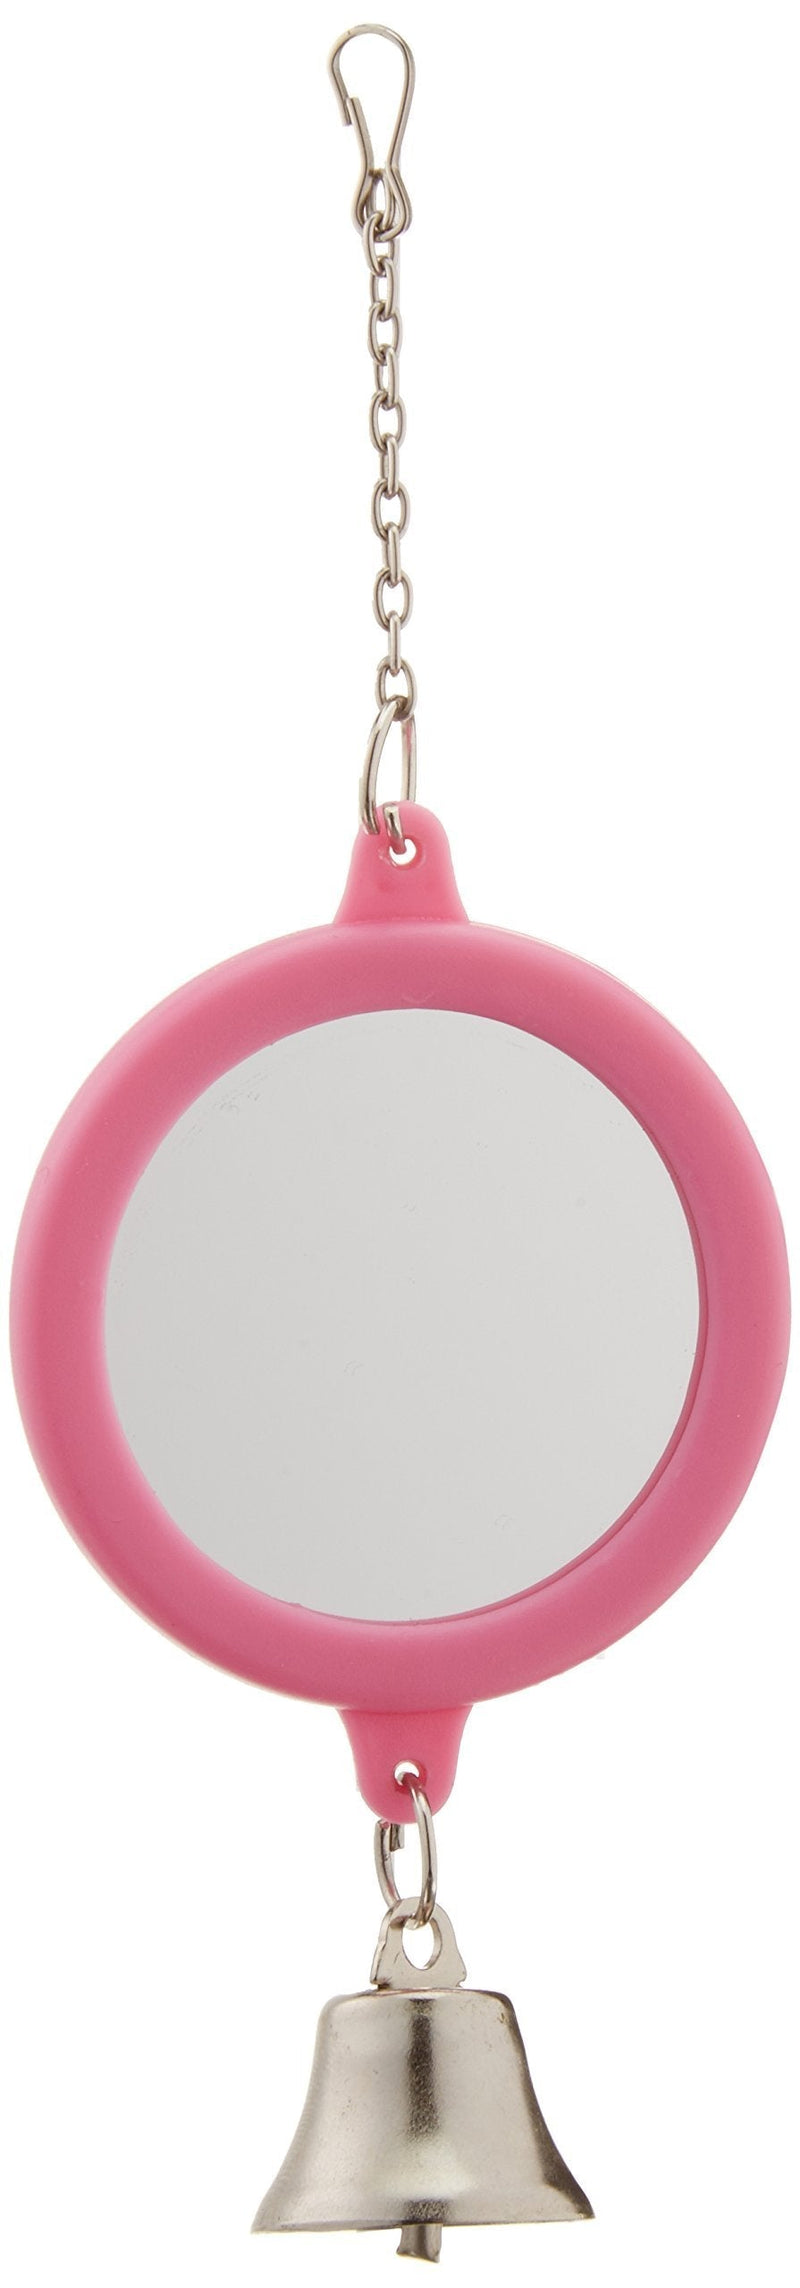 [Australia] - Penn Plax Round Mirror with Bell for Bird Cage 